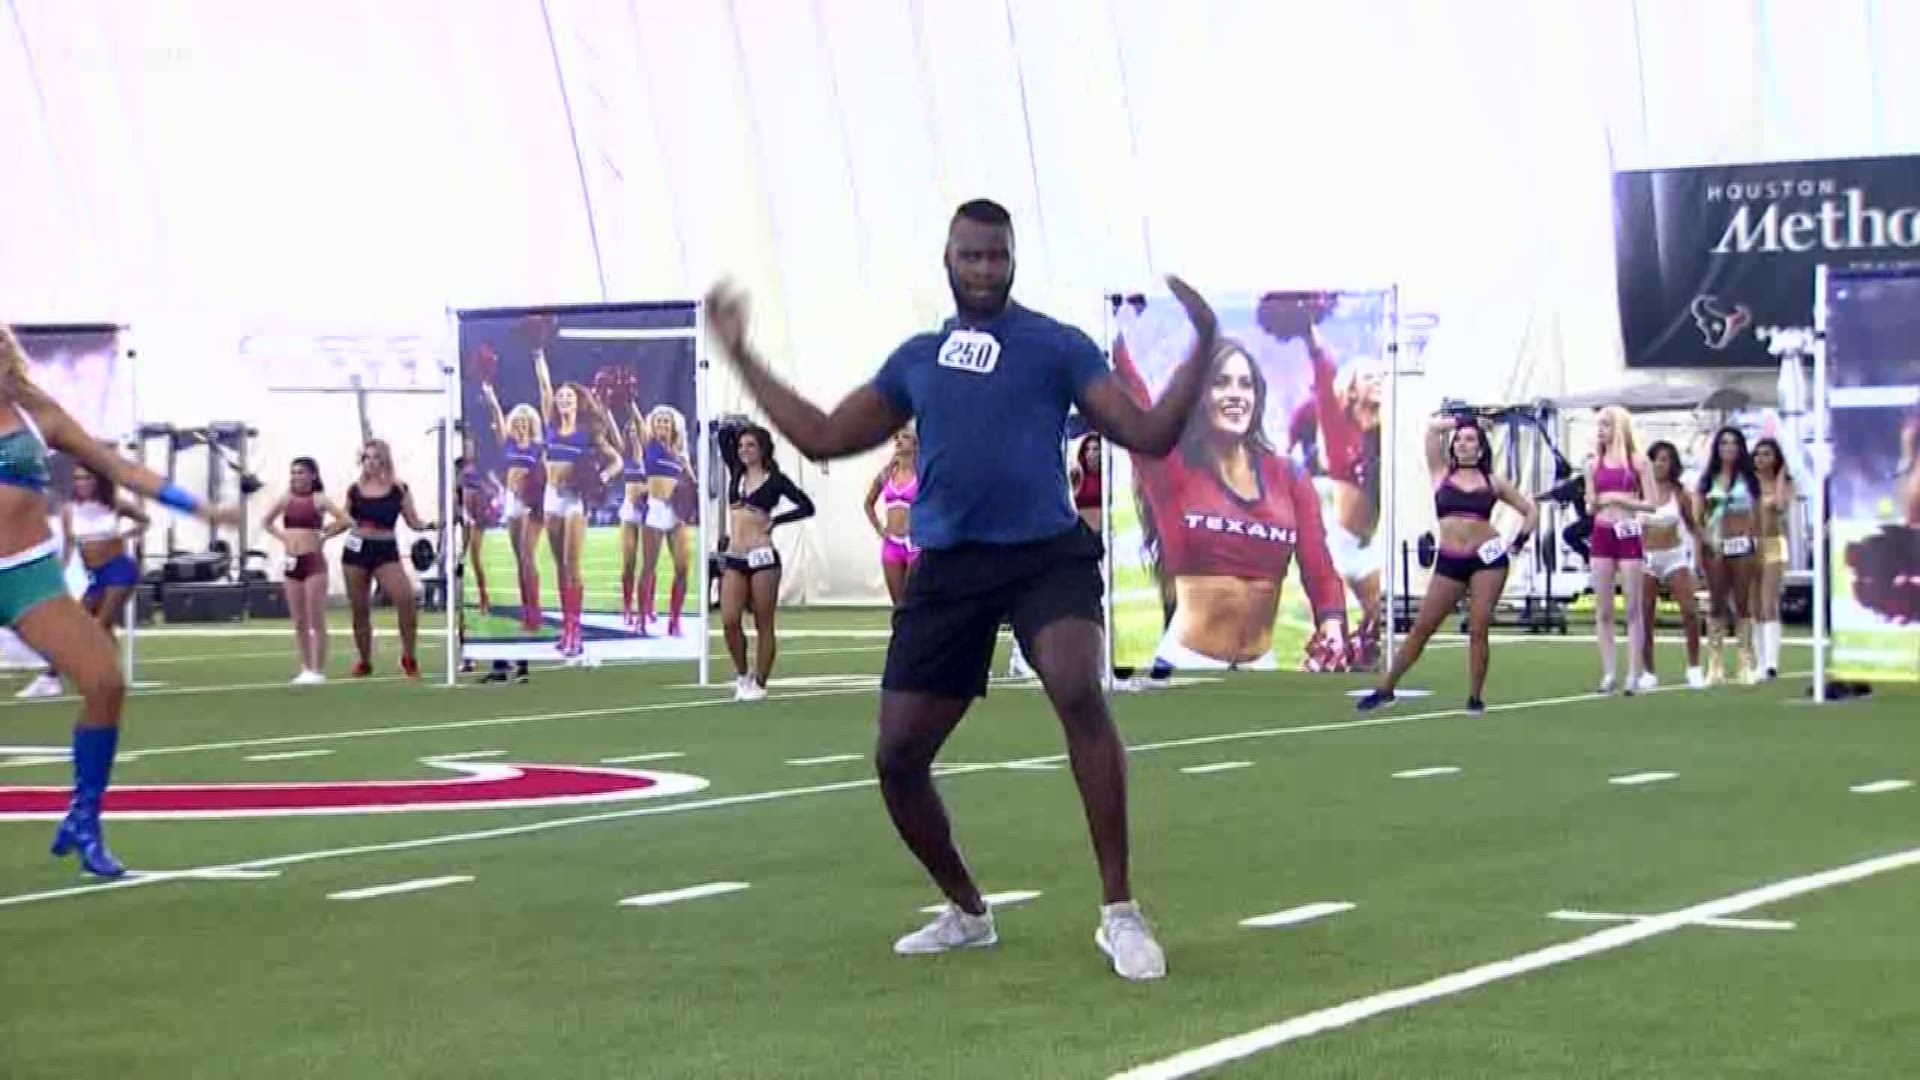 Hundreds this weekend tried out for a coveted spot as a Houston Texans cheerleader.